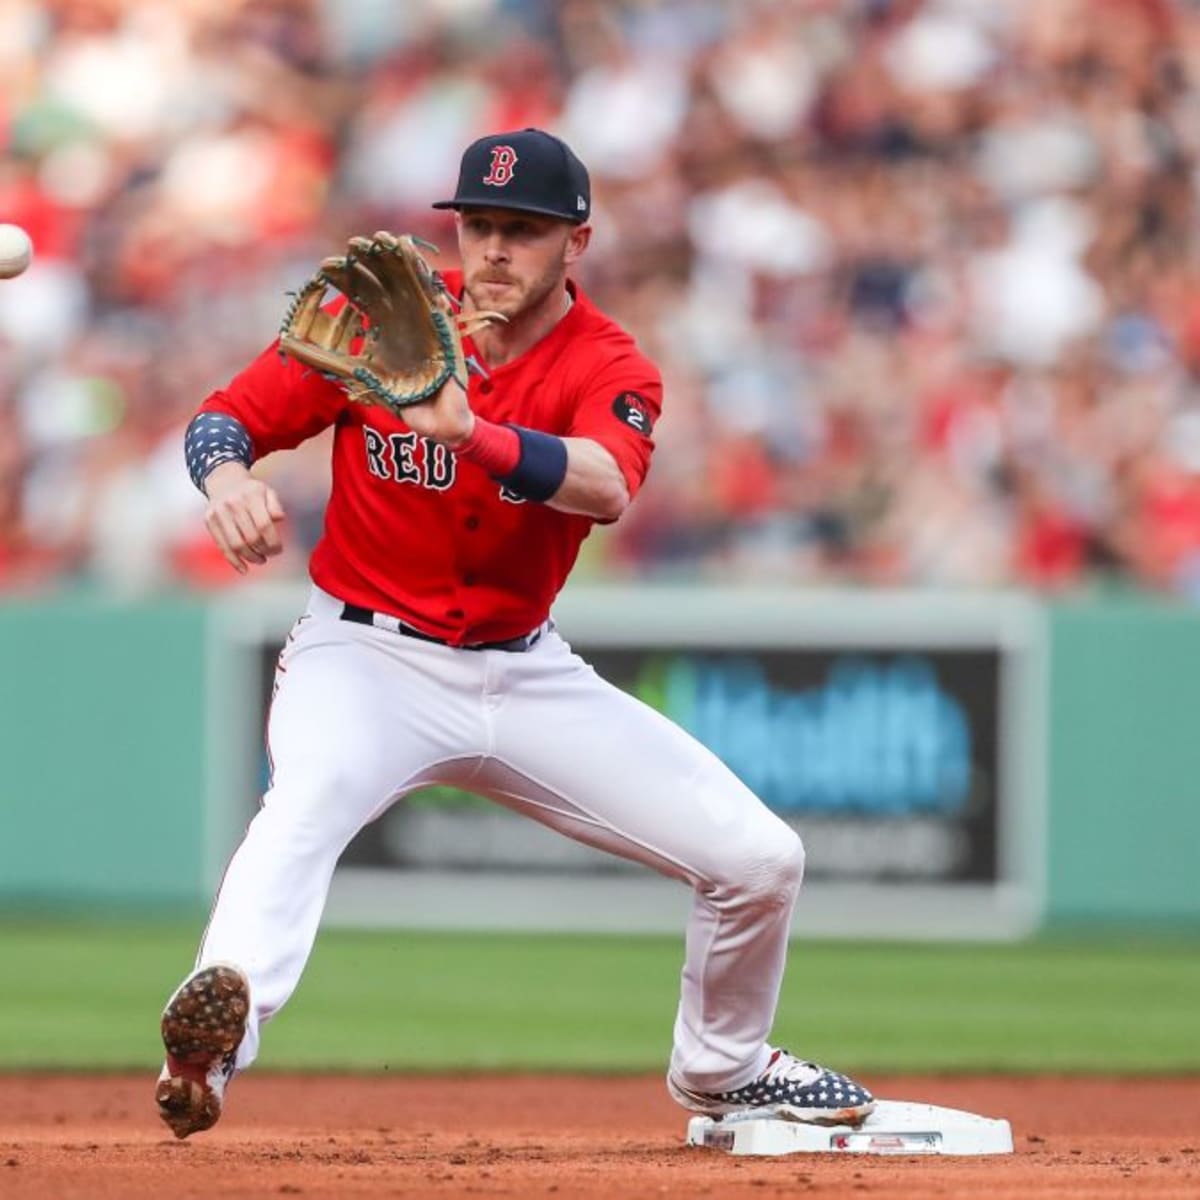 Why was Trevor Story willing to move to second base for Boston Red